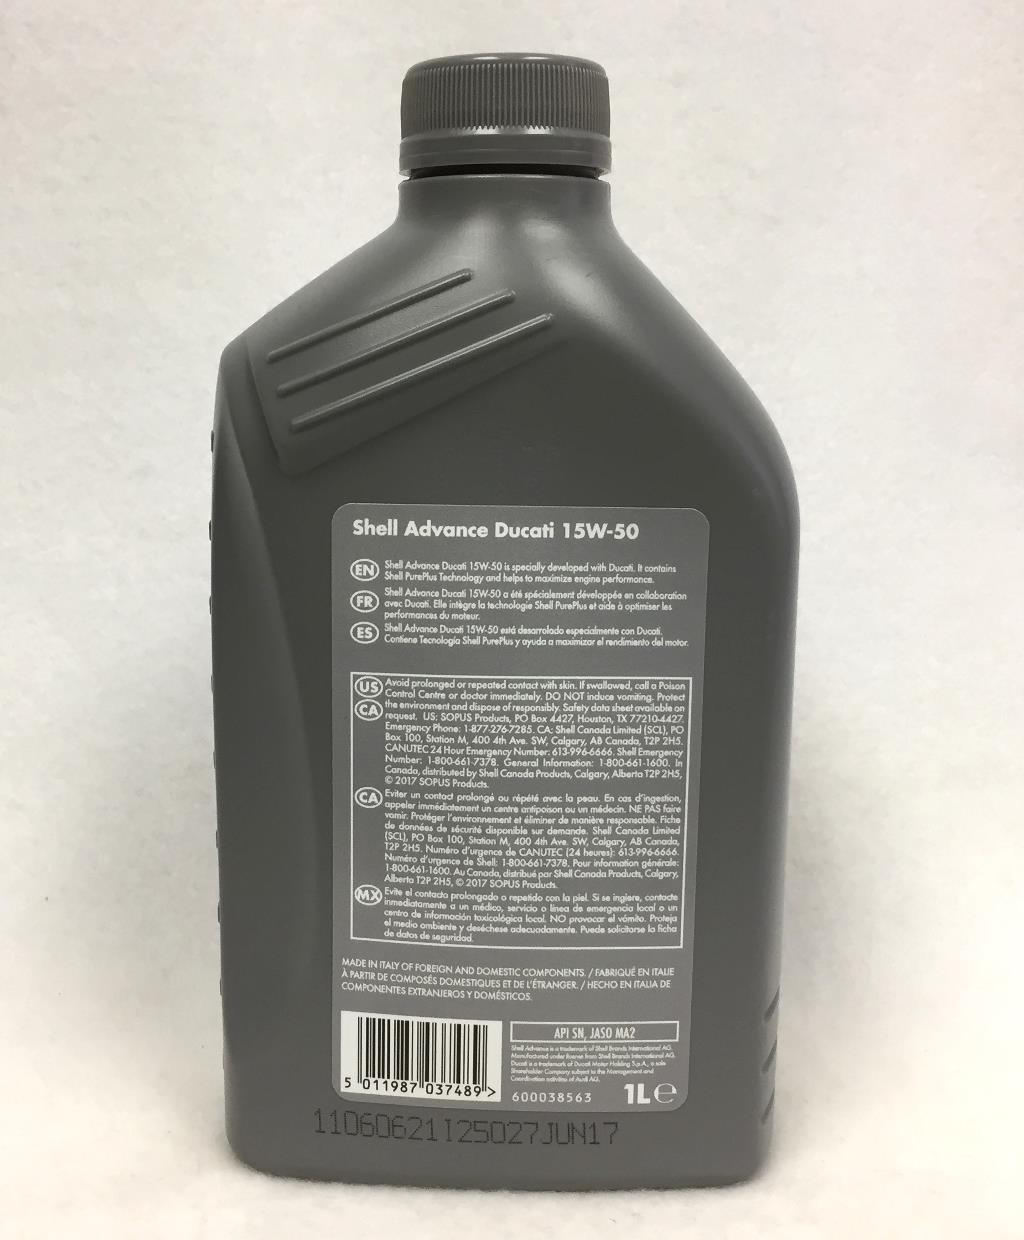 Ducati Shell Advance 15w-50 Factory Motorcycle Engine Oil Liter 550047581